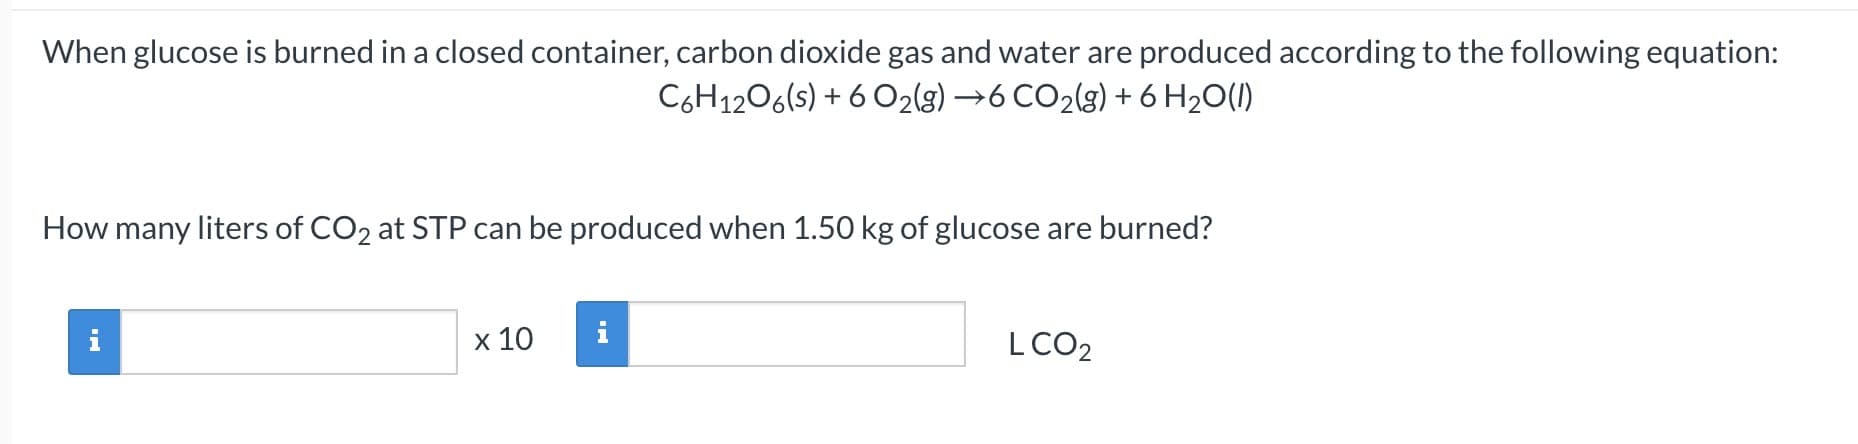 When glucose is burned in a closed container, carbon dioxide gas and water are produced according to the following equation:
C6H1206(s) + 6 O2(g) →6 CO2(g) + 6 H20(1)
How many liters of CO2 at STP can be produced when 1.50 kg of glucose are burned?
x 10
i
LCO2
